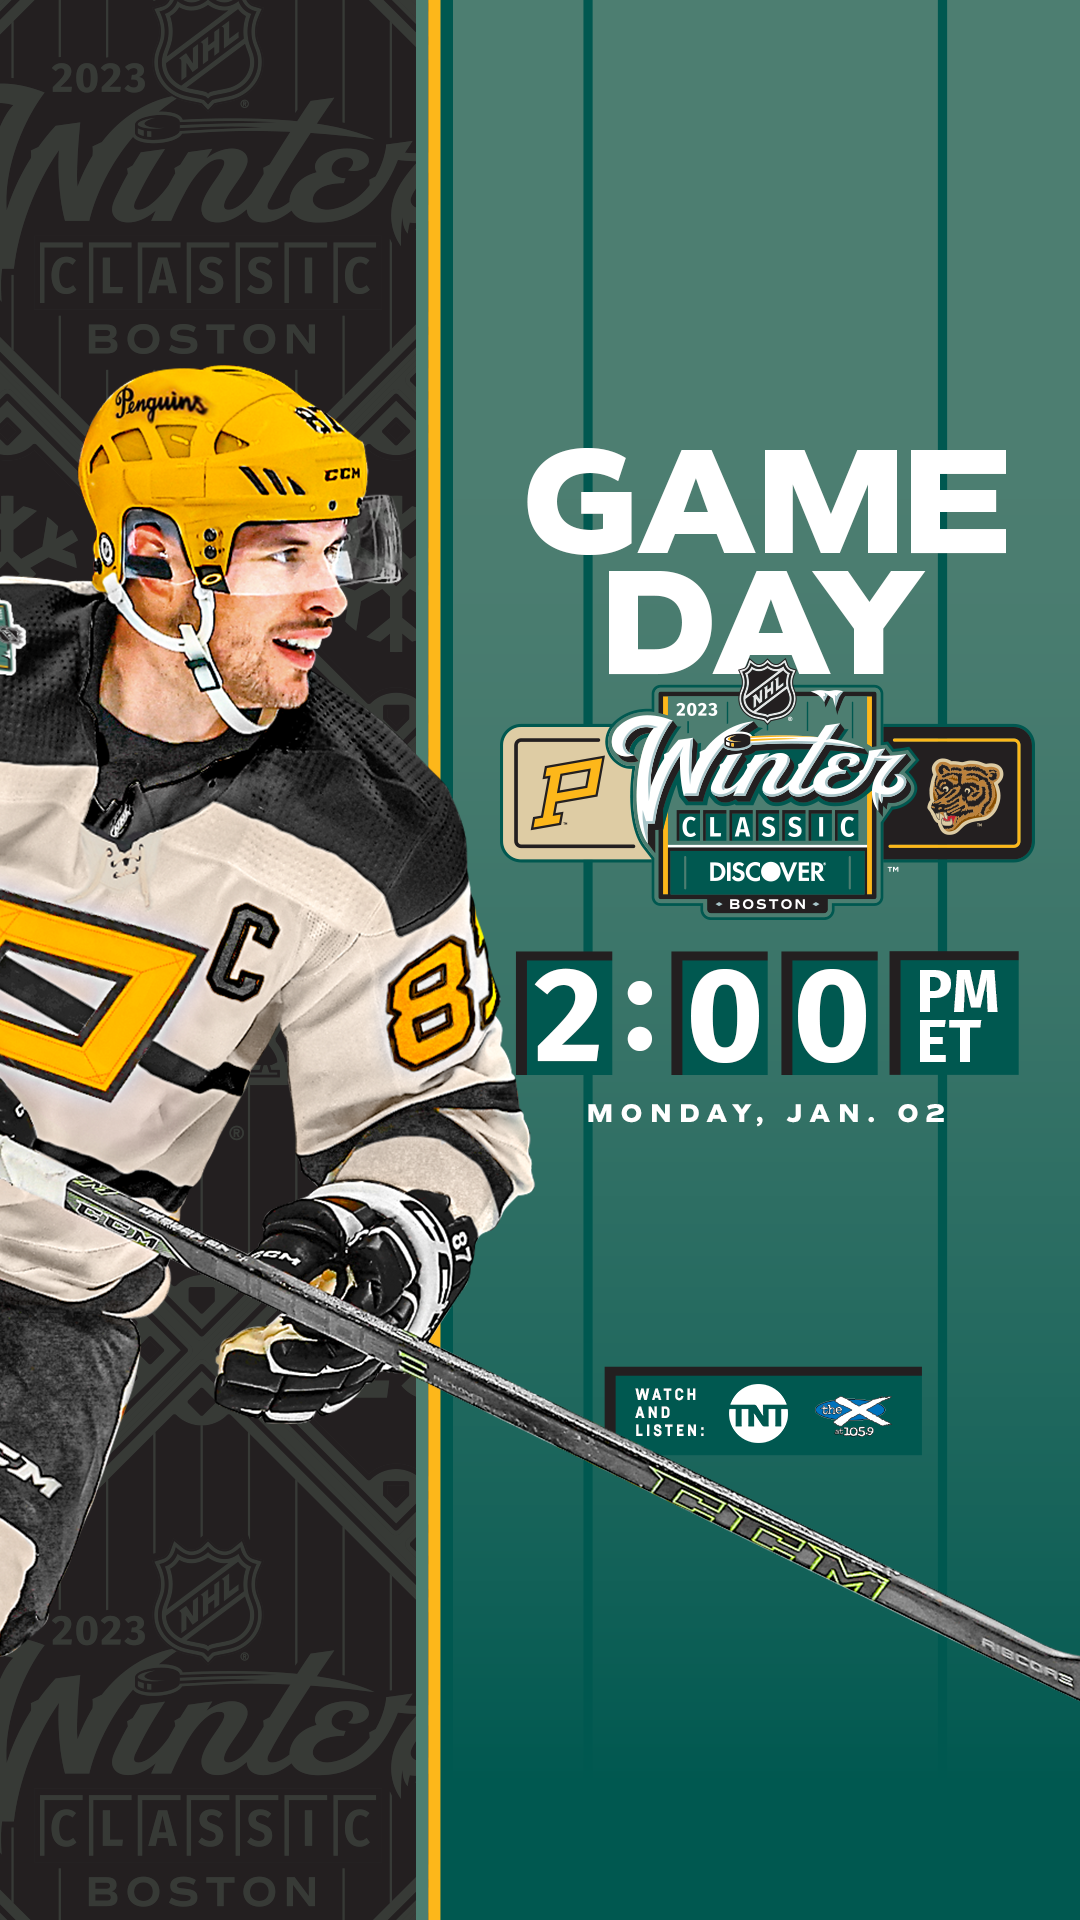 Gameday_0102_BOS-WC_9x16.png